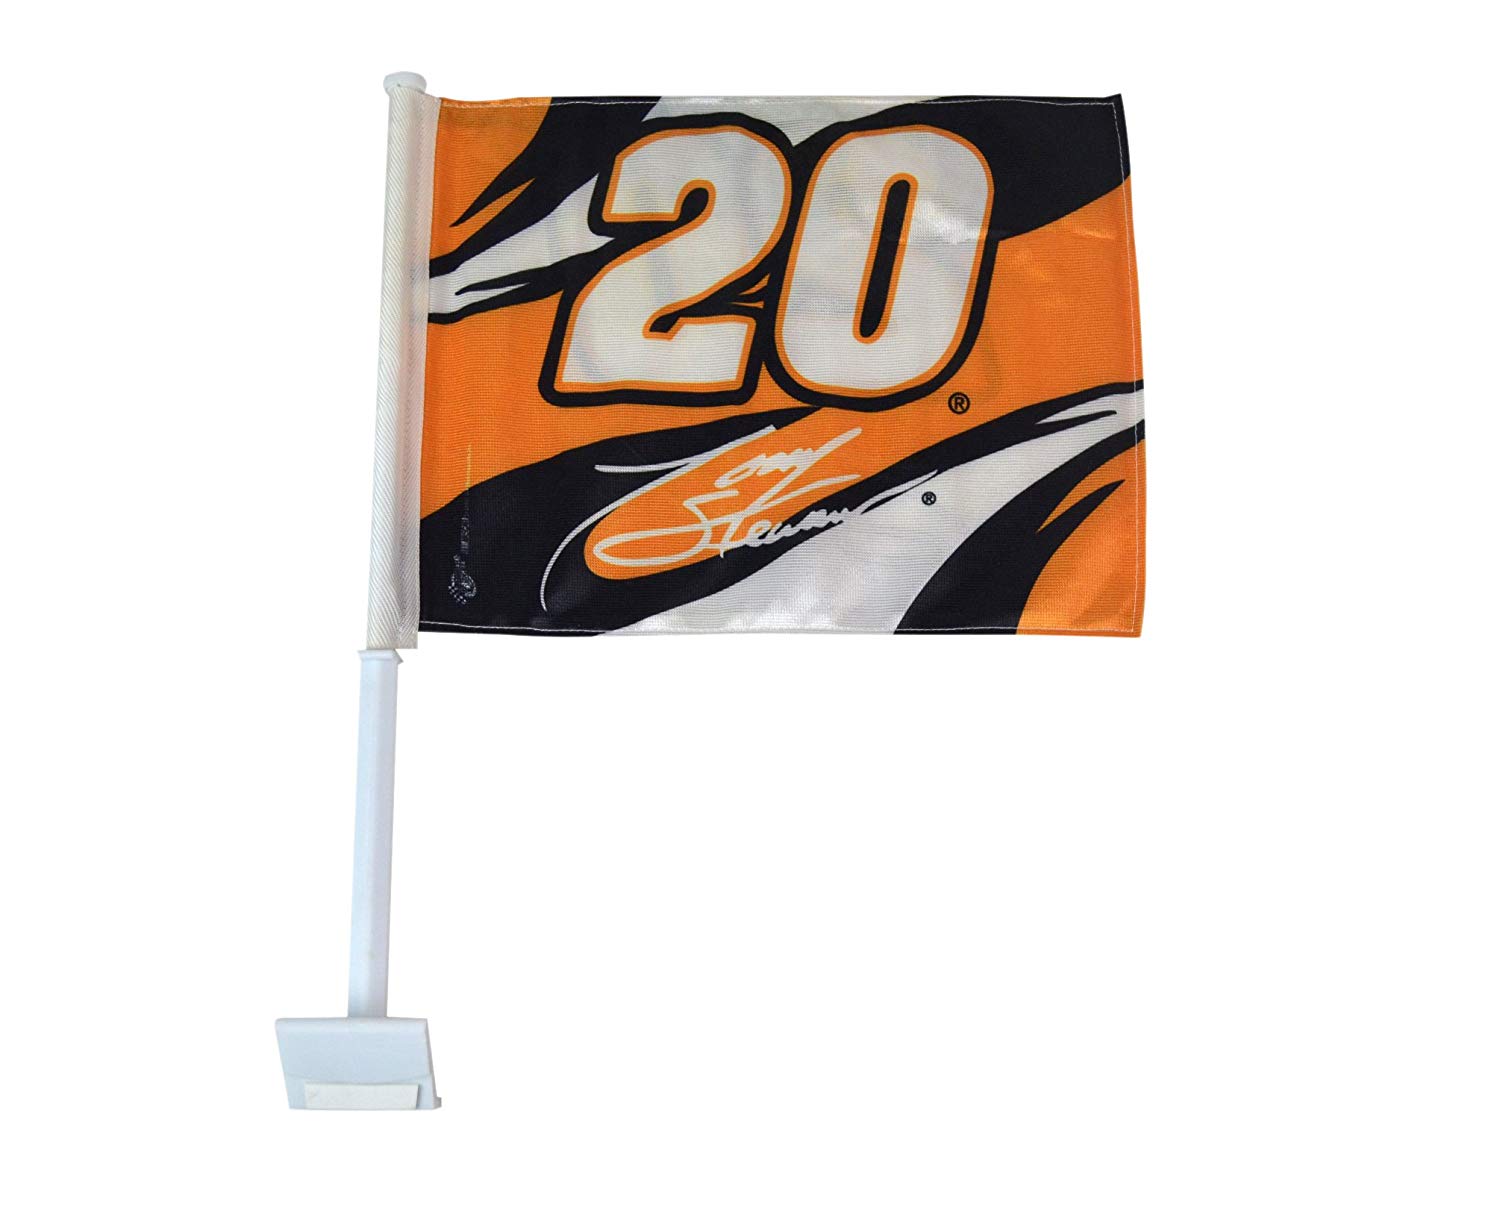 Official NASCAR Fan Shop Authentic Car Window Flags 2-Pack. Show Pride for your favorite NASCAR driver at Track or Driving around Town